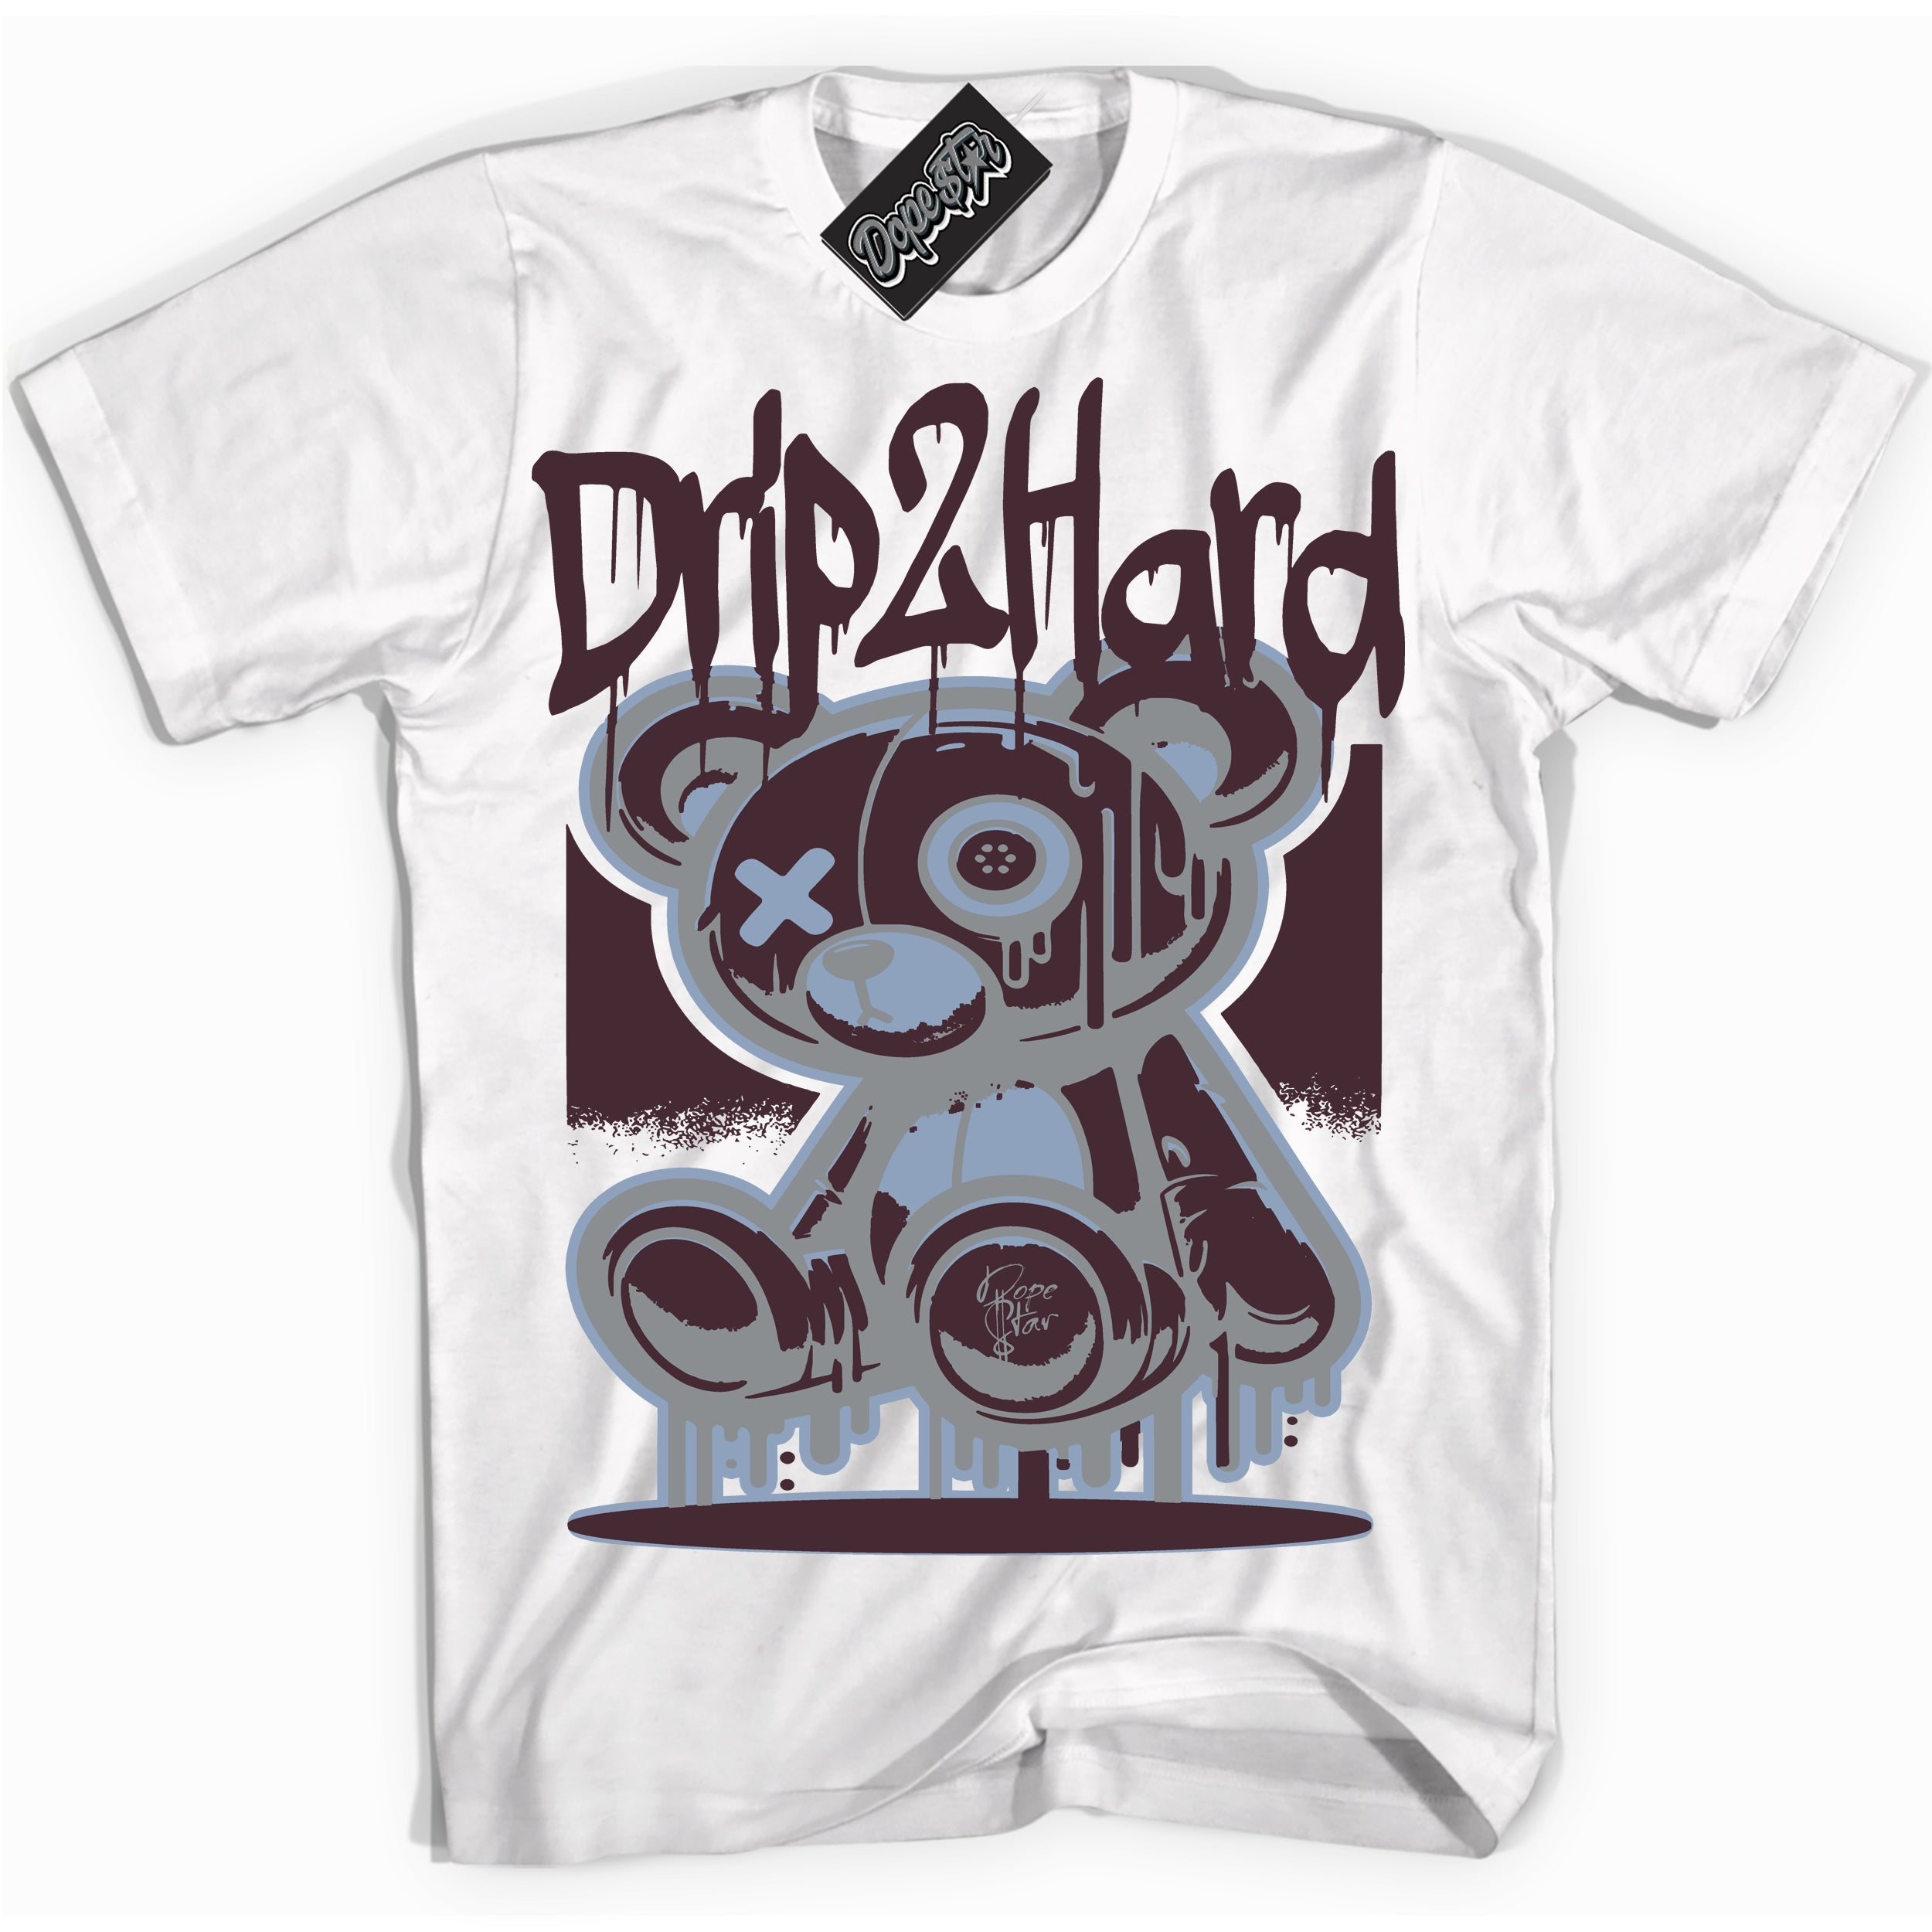 Cool White graphic tee with “ Drip 2 Hard ” design, that perfectly matches Burgundy 5s